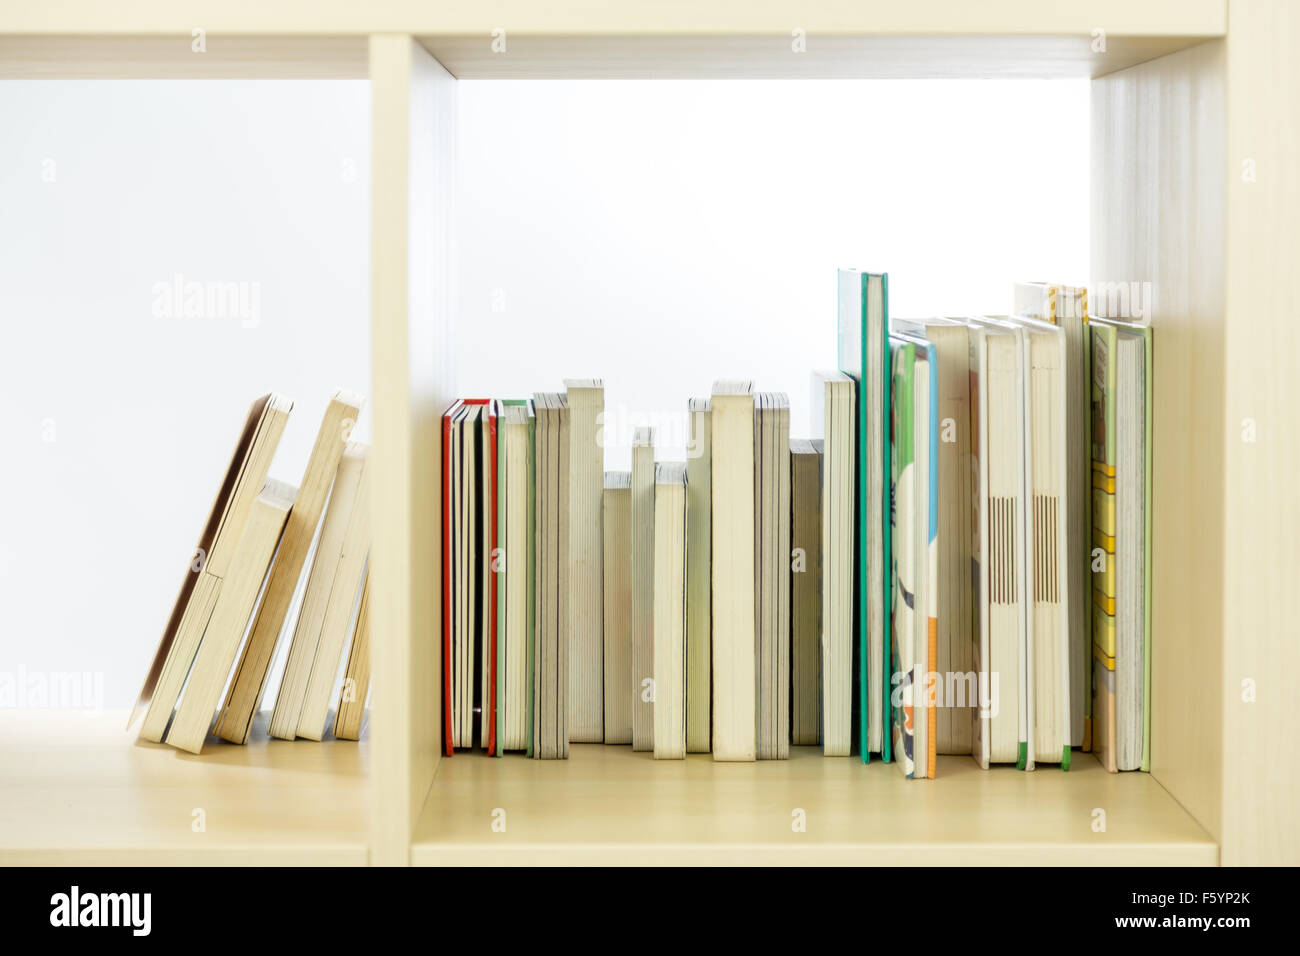 Row of books in a wooden bookcase Stock Photo